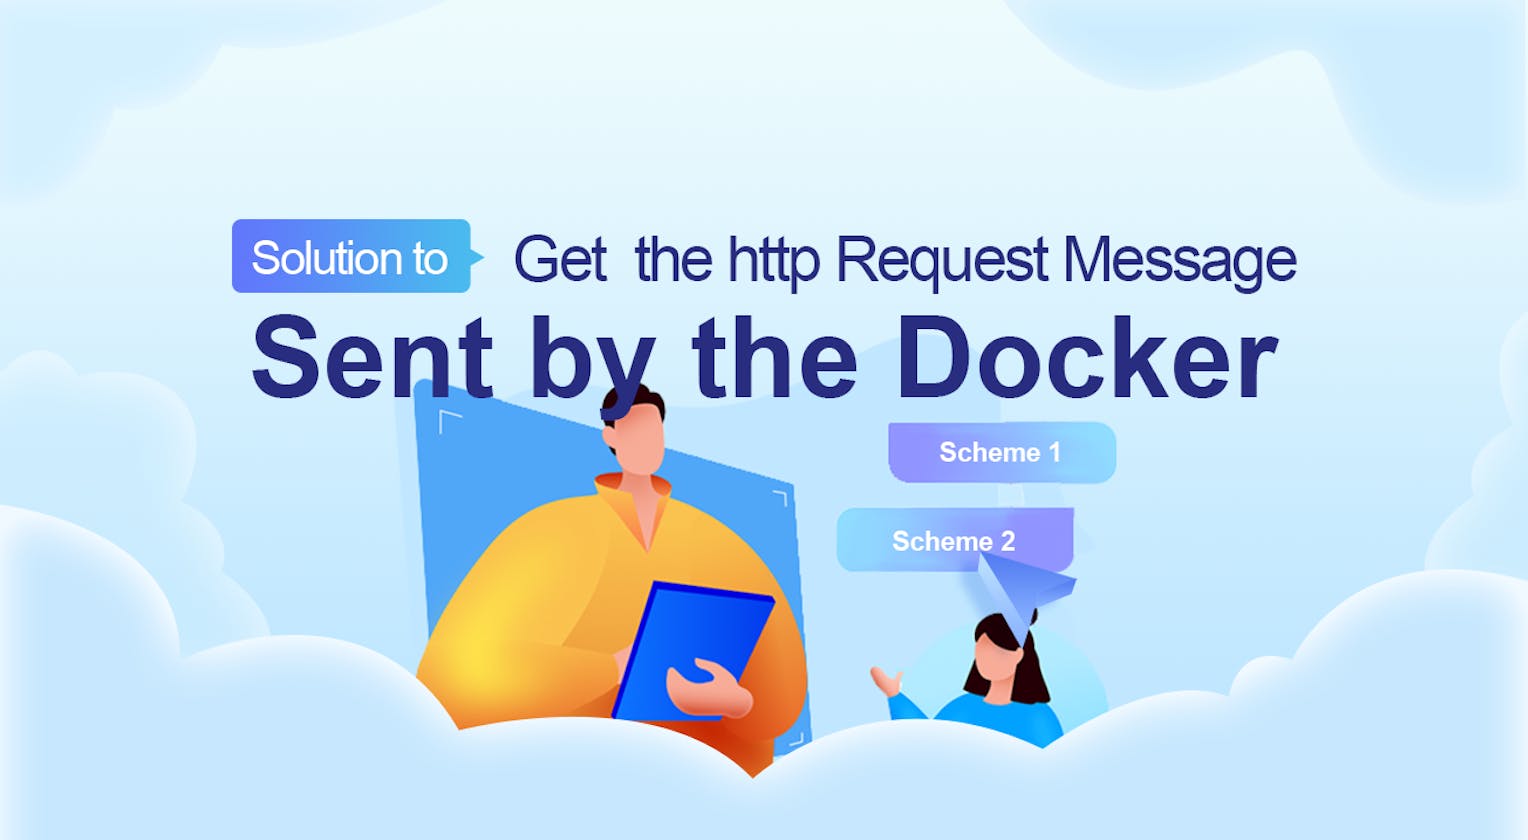 Solution to Get the http Request Message Sent by the Docker